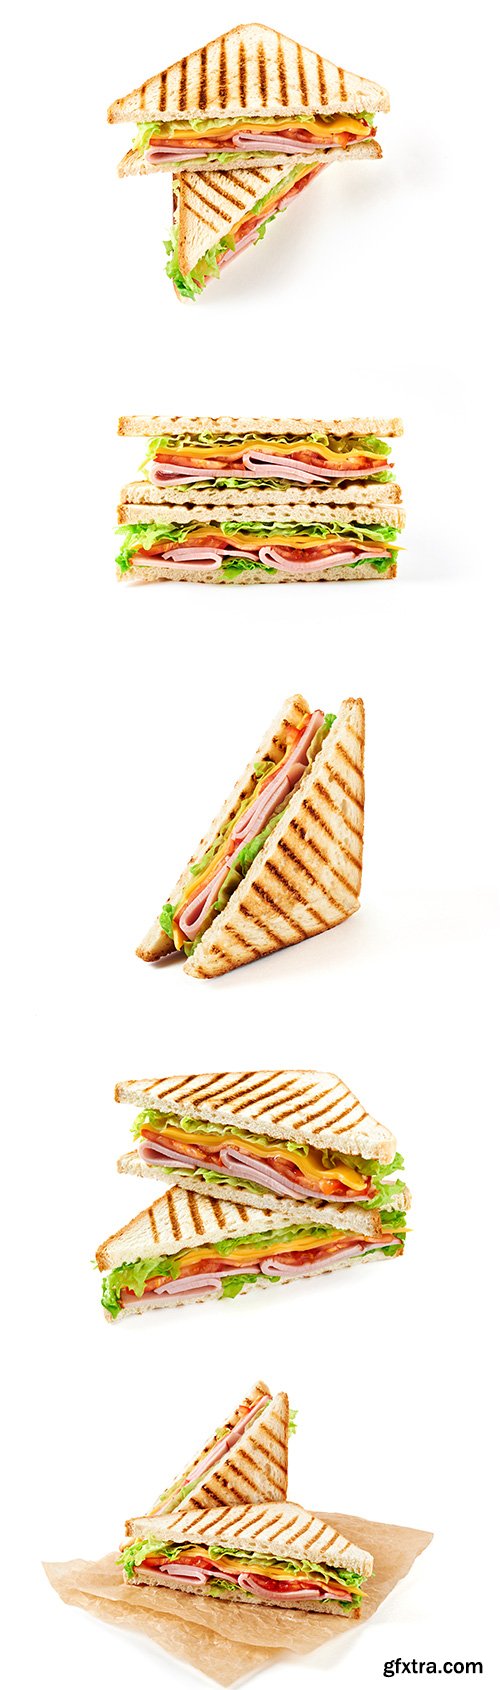 Sandwich With Toasted Bread - 15xJPGs